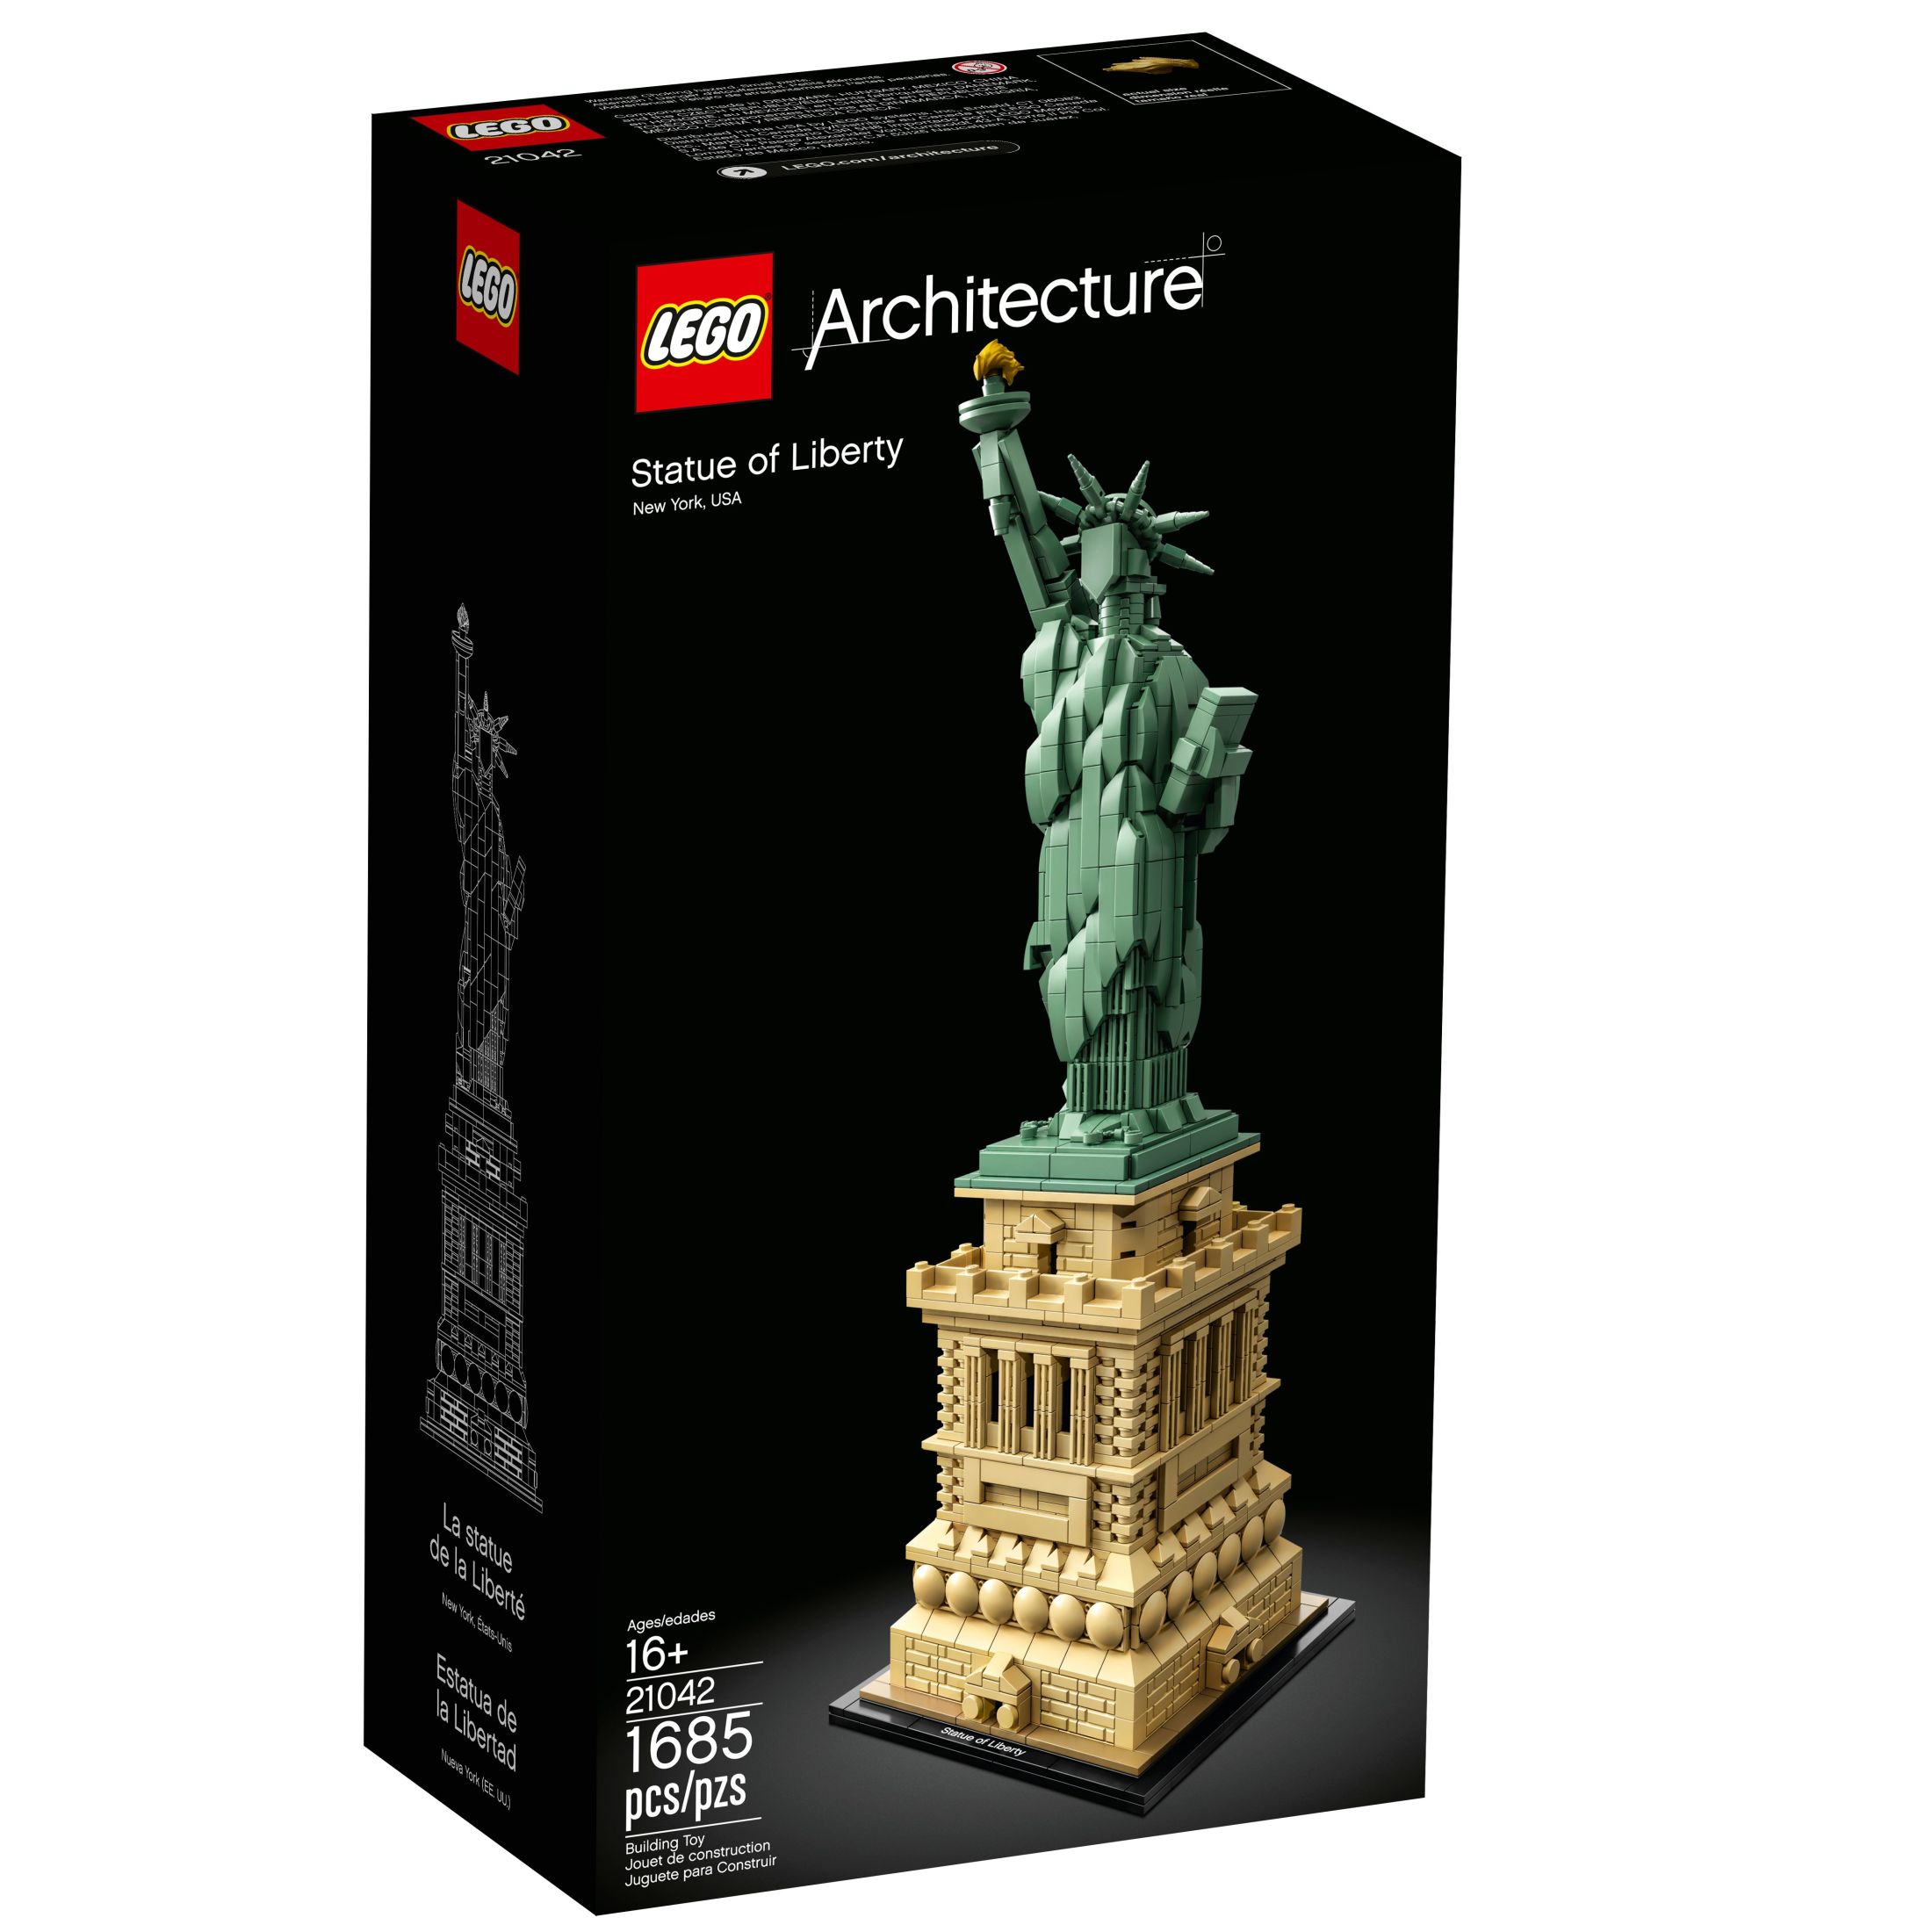 LEGO Architecture Statue of Liberty 21042 Model Building Set - Collectible New York City Souvenir, Creative Home Décor or Office Centerpiece, Great Gift Idea for Adults and Teens - image 4 of 7